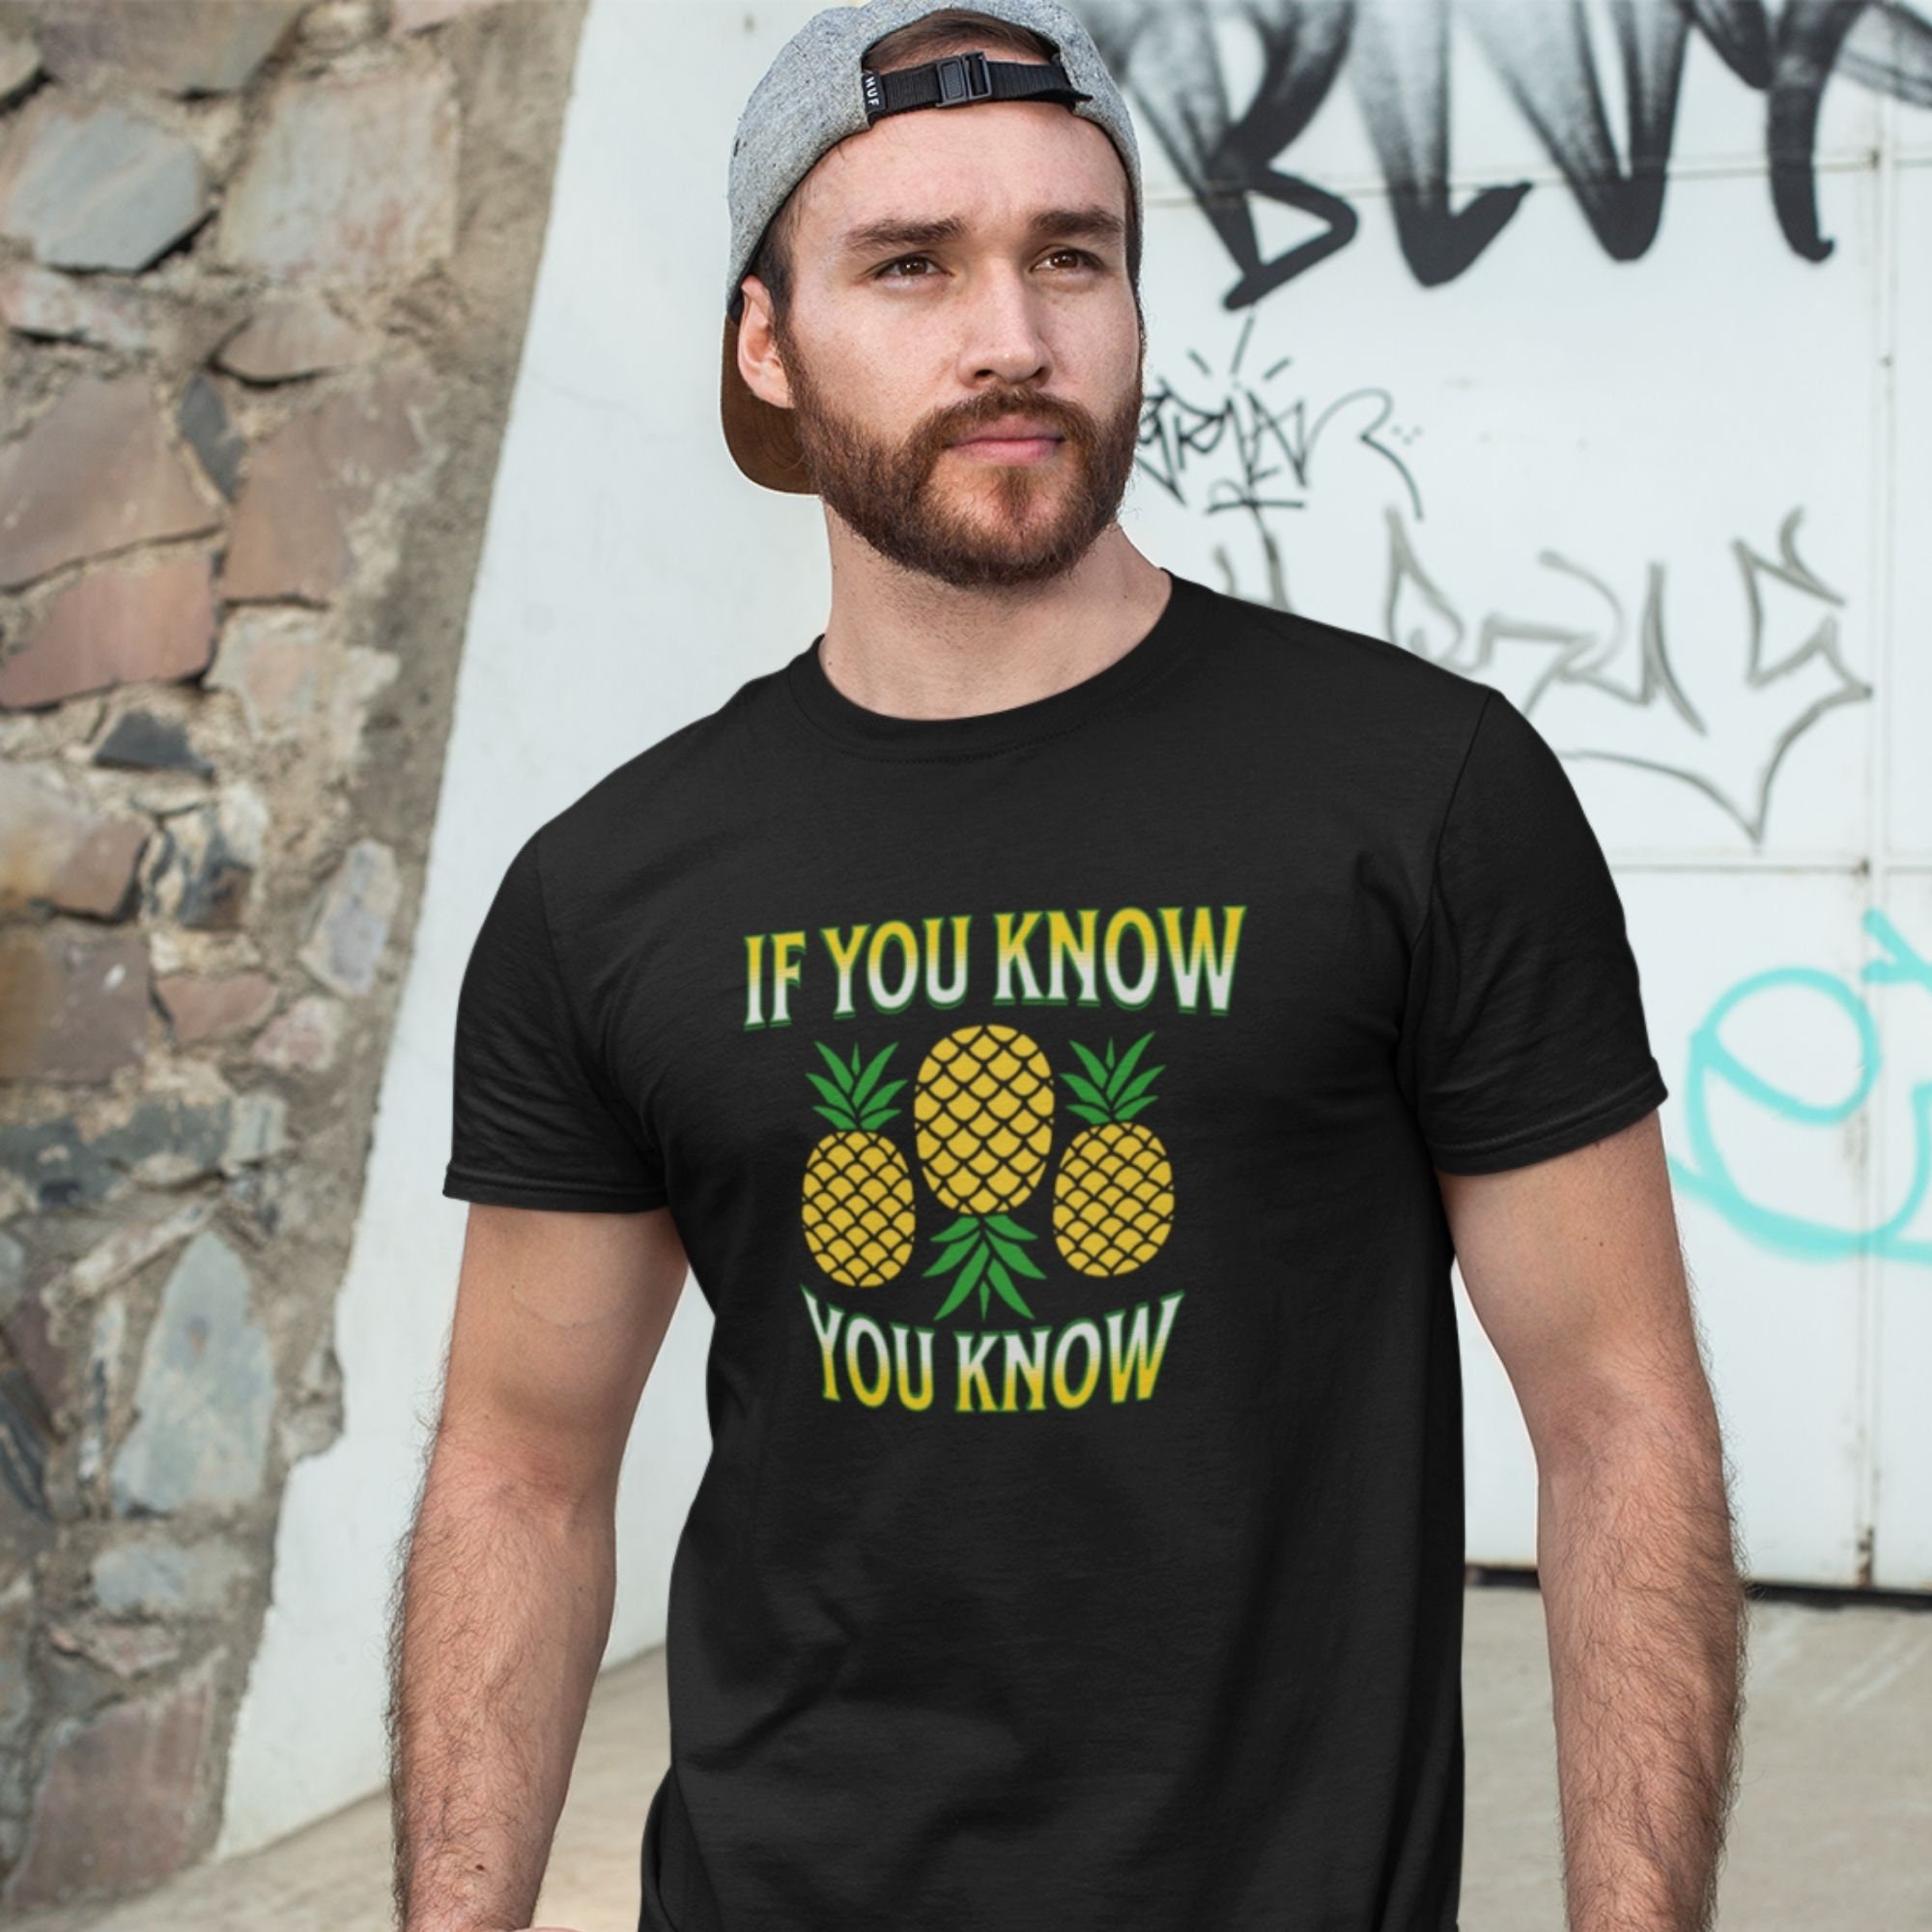 Swingers Pineapple Shirt If You Know You Know Pineapple image